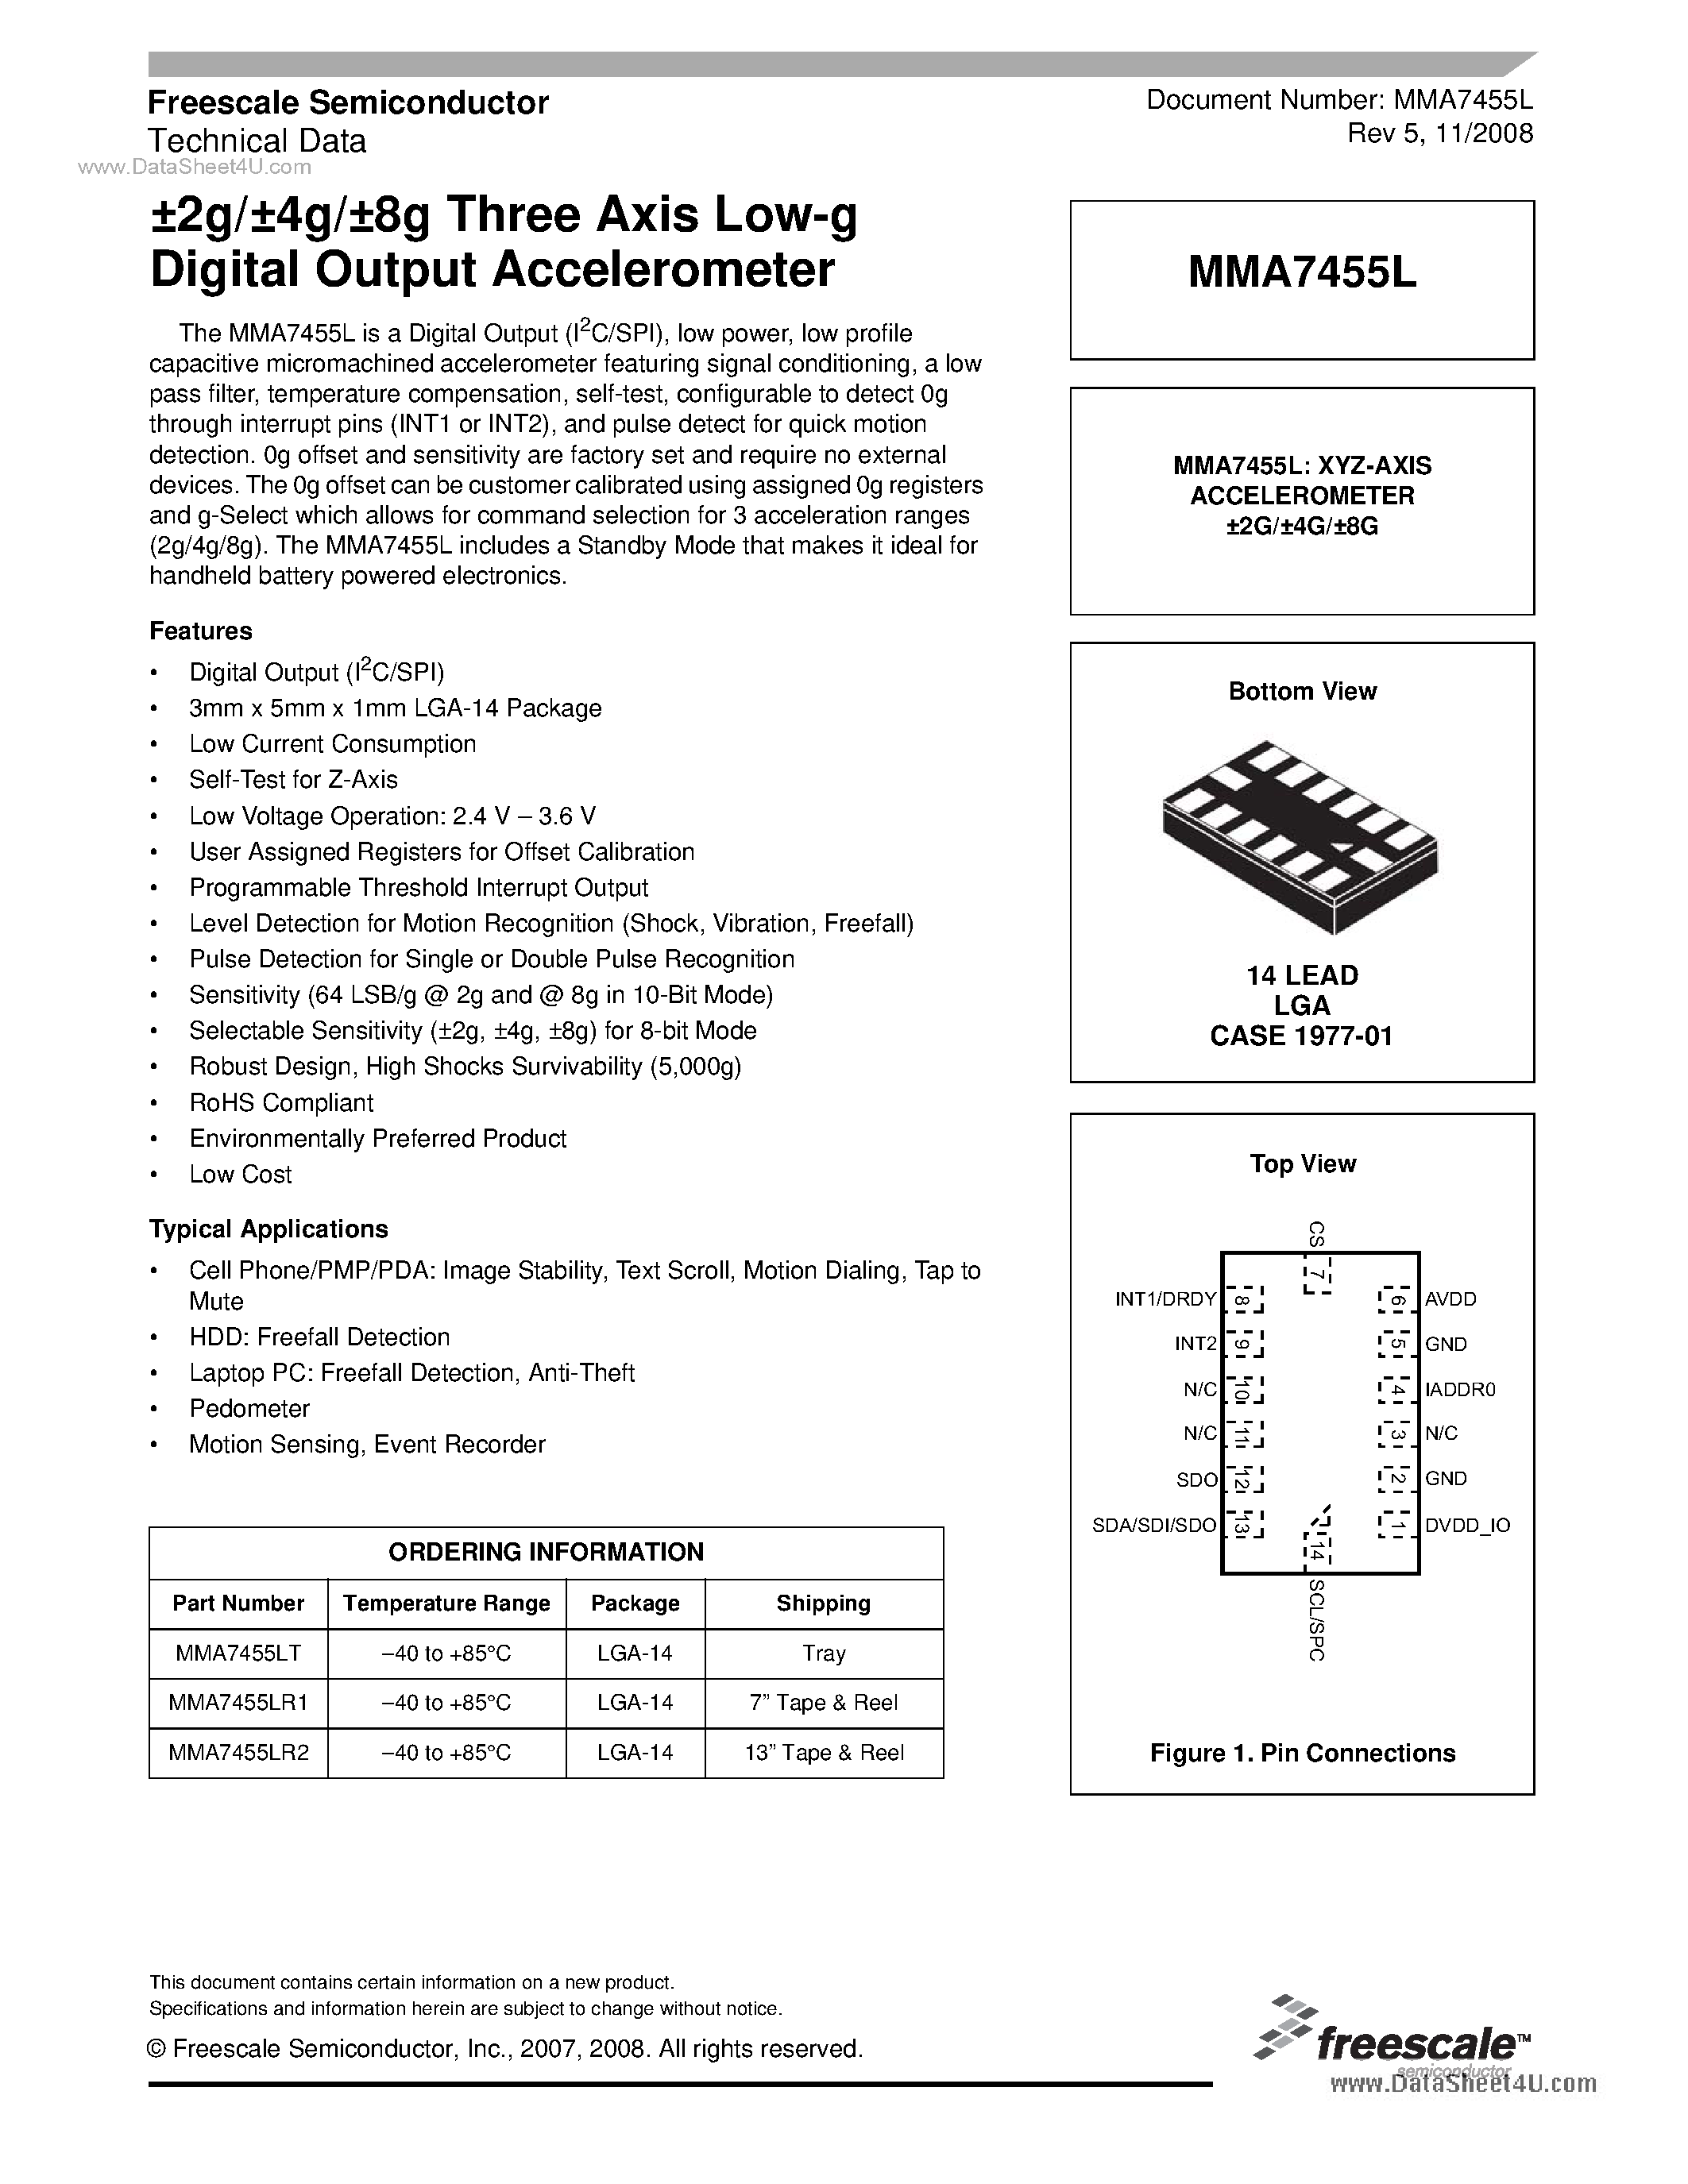 Datasheet MMA7455L - Three Axis Low-g Digital Output Accelerometer page 1